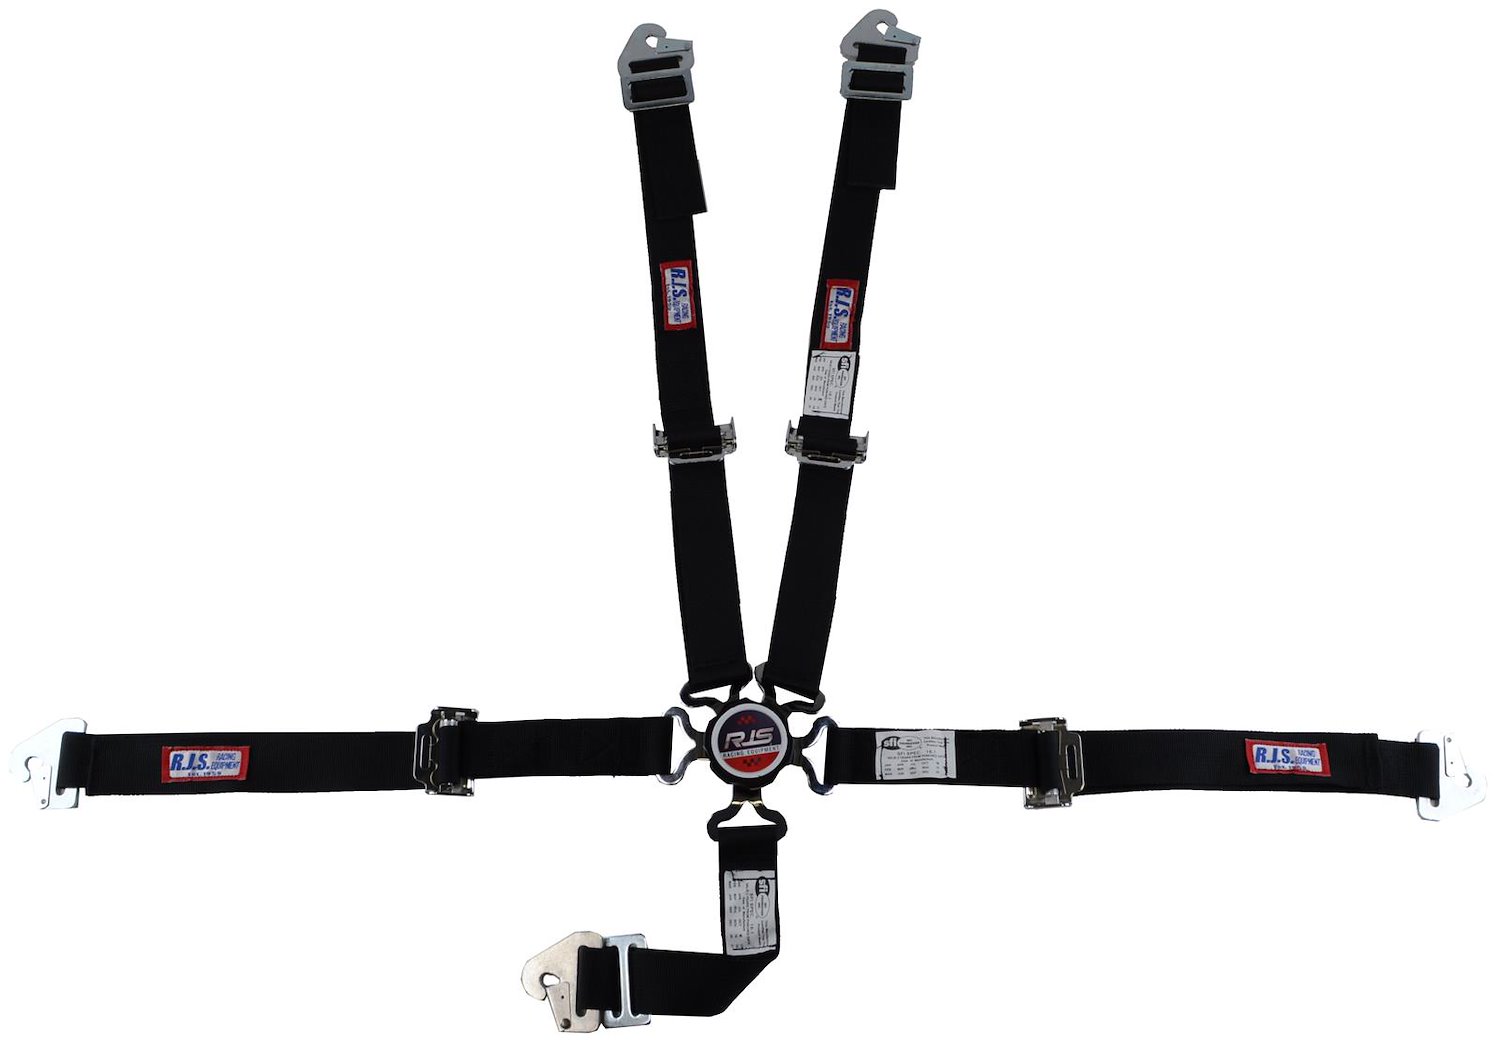 SFI 16.1 CAM-LOCK HARNESS 2 PULL UP Lap Belt 2 Shoulder Harness V ROLL BAR Mount 2 DOUBLE Sub ALL SNAP ENDS GRAY